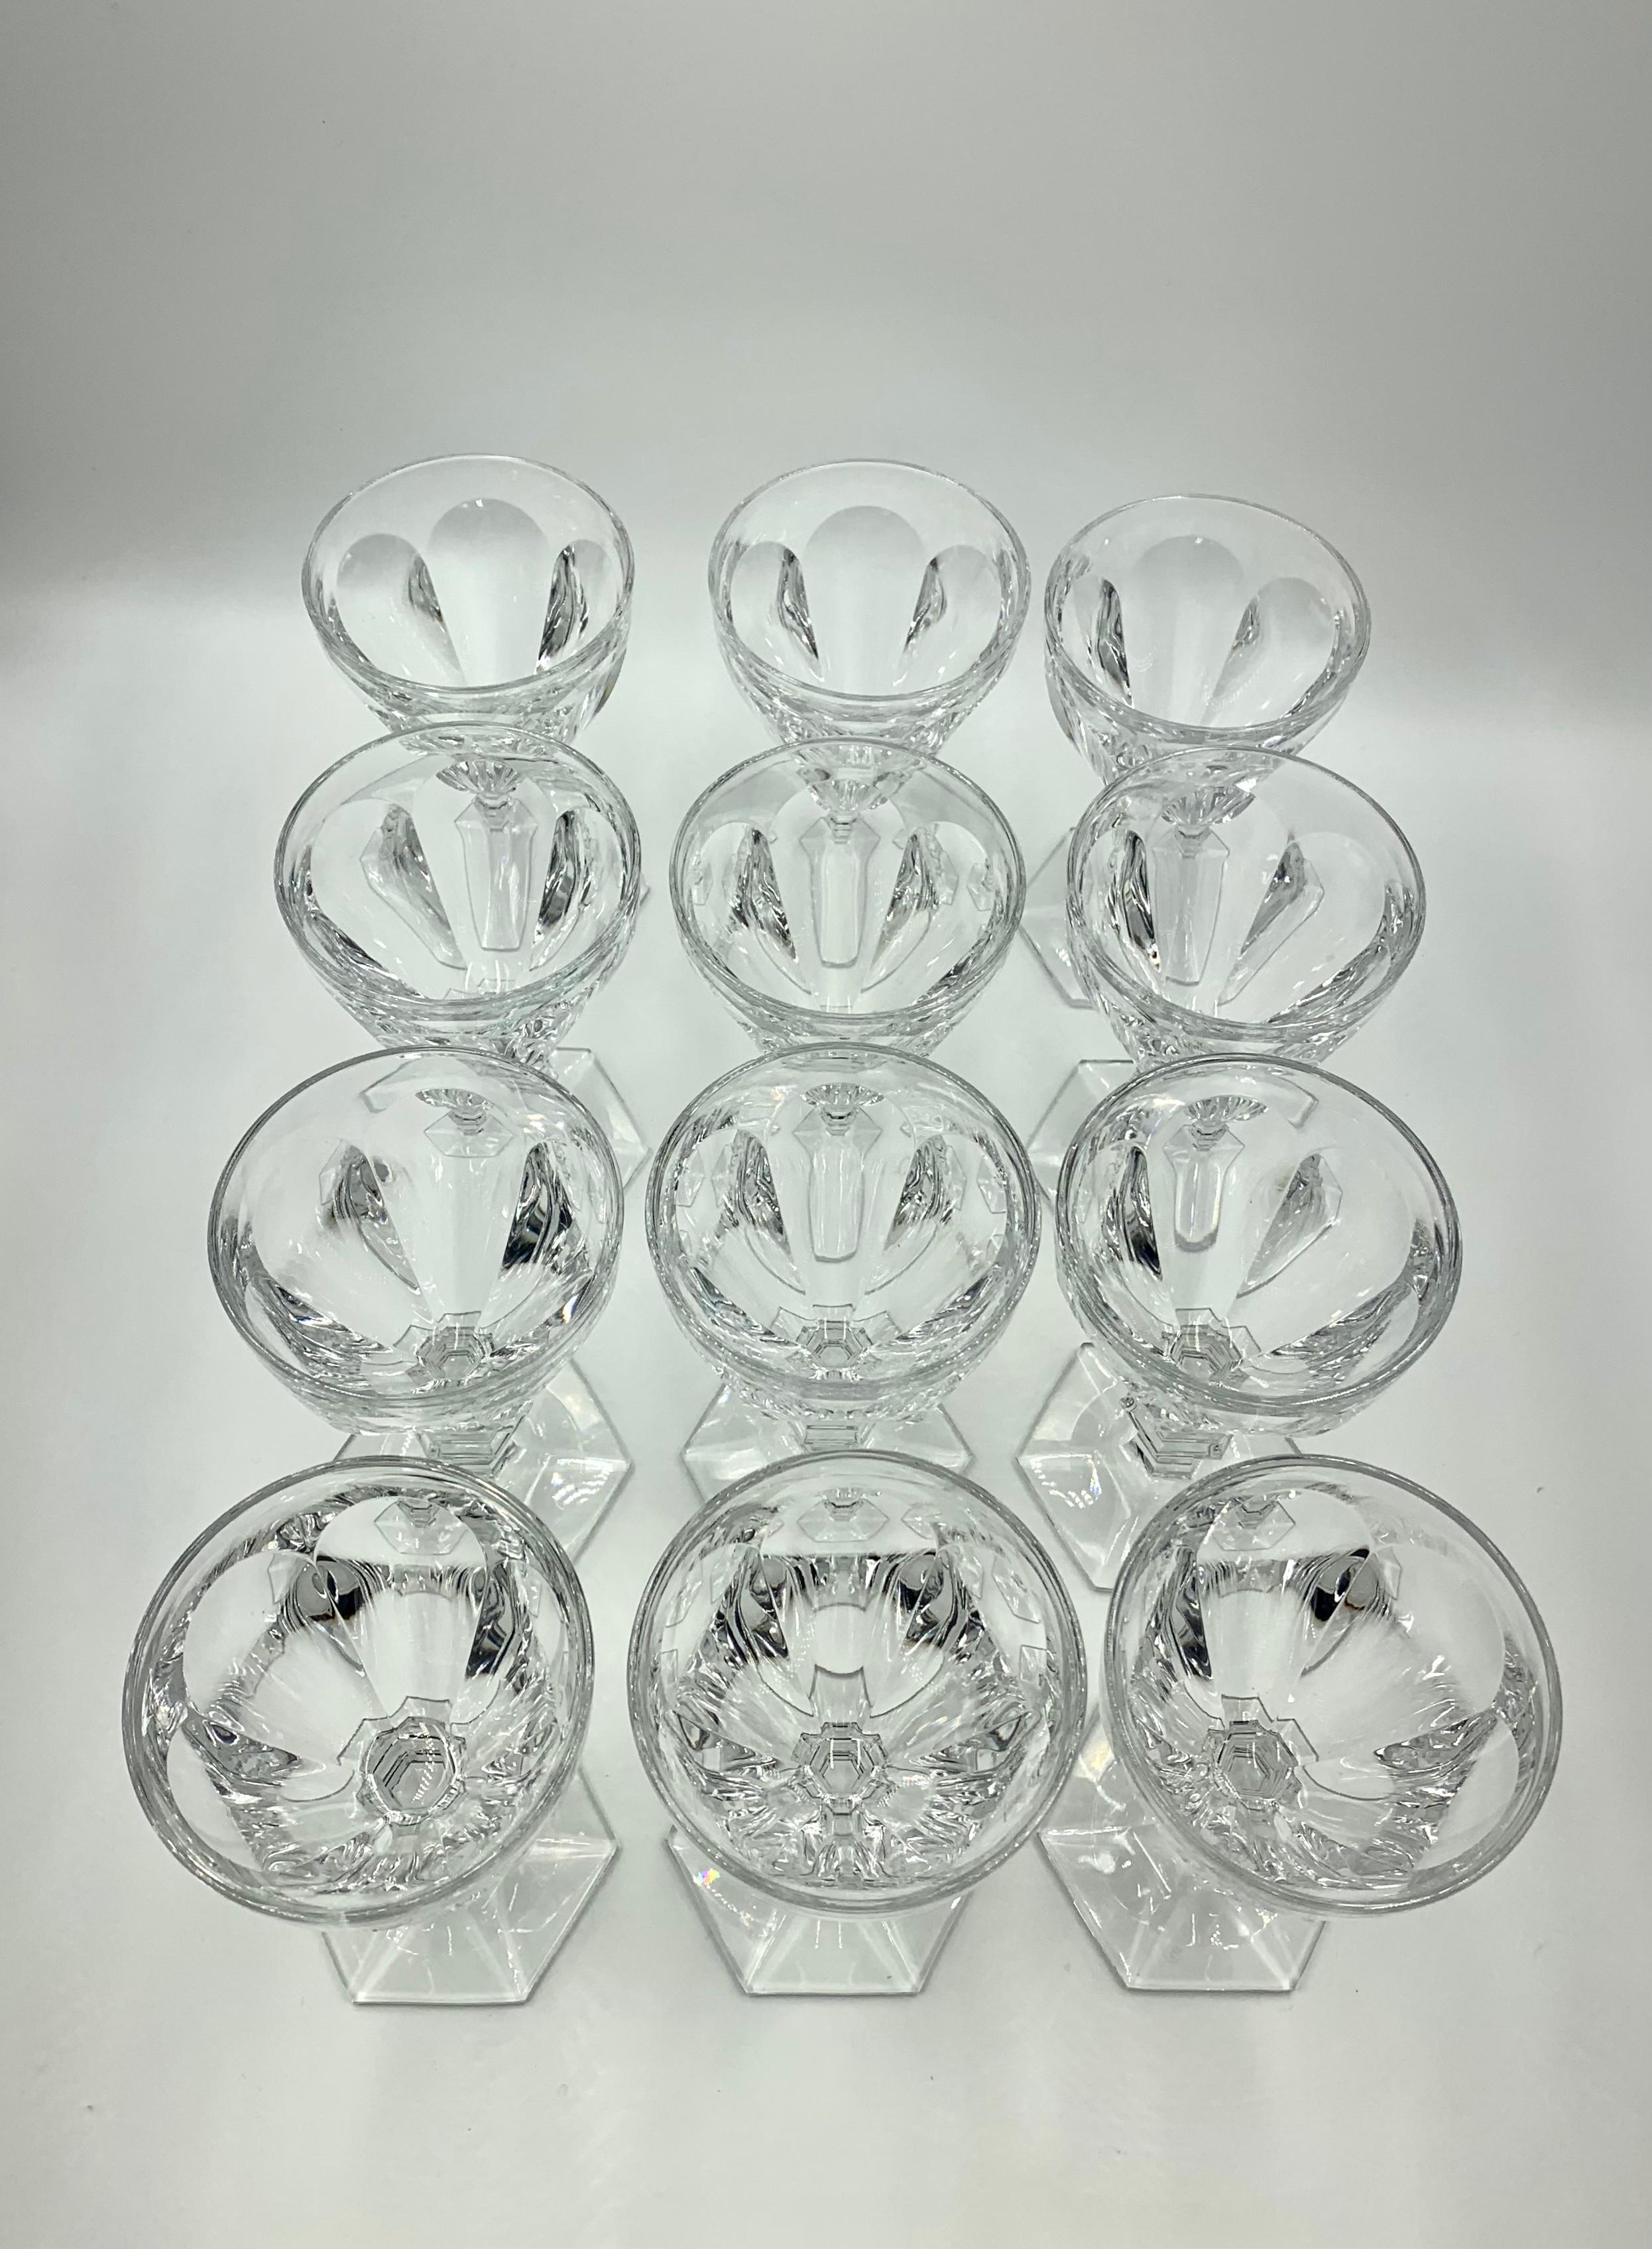 French Baccarat Harcourt 1841 Set of 12 Wine Glasses For Sale